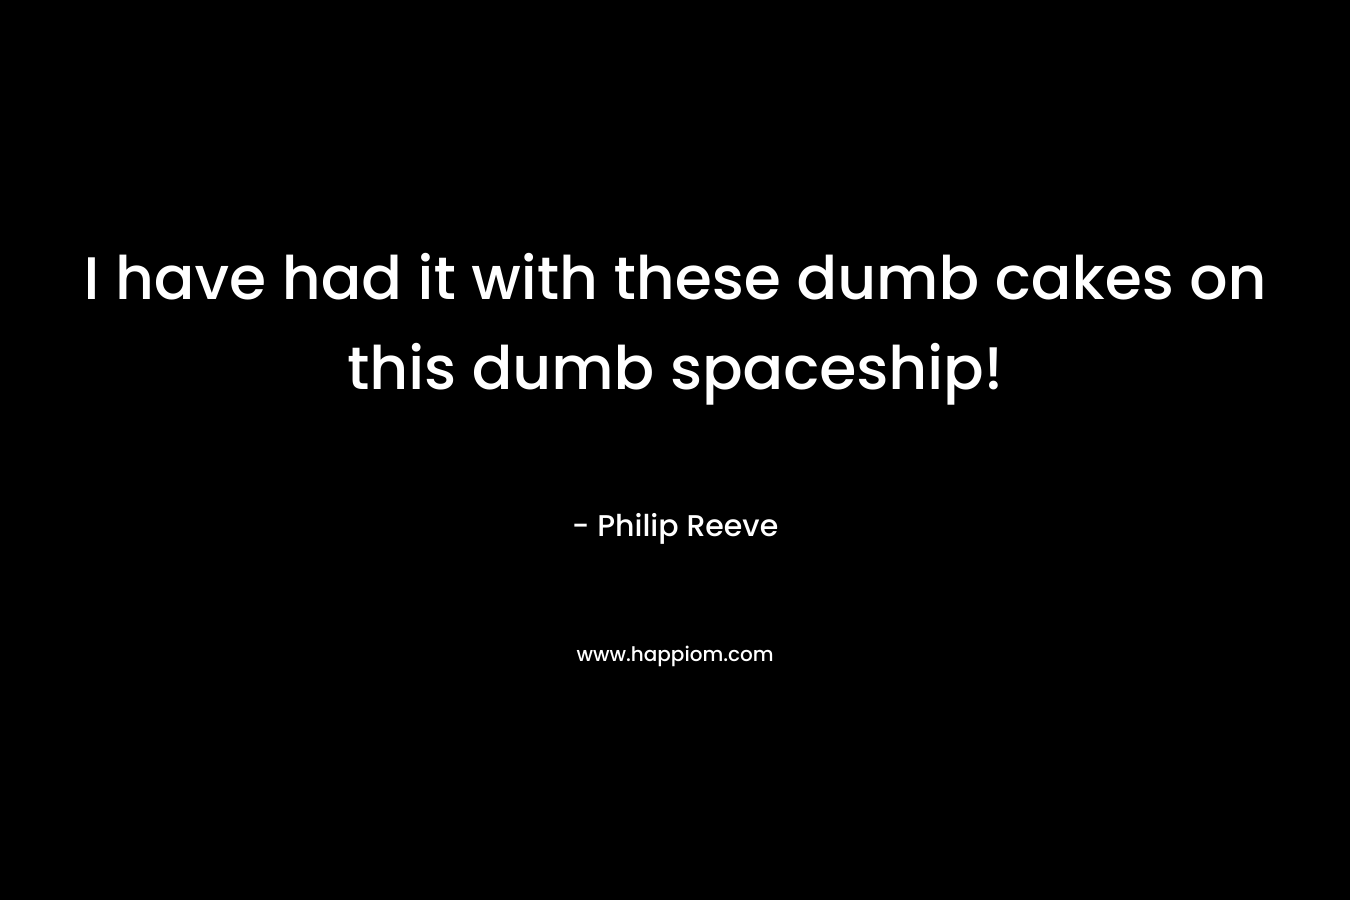 I have had it with these dumb cakes on this dumb spaceship! – Philip Reeve